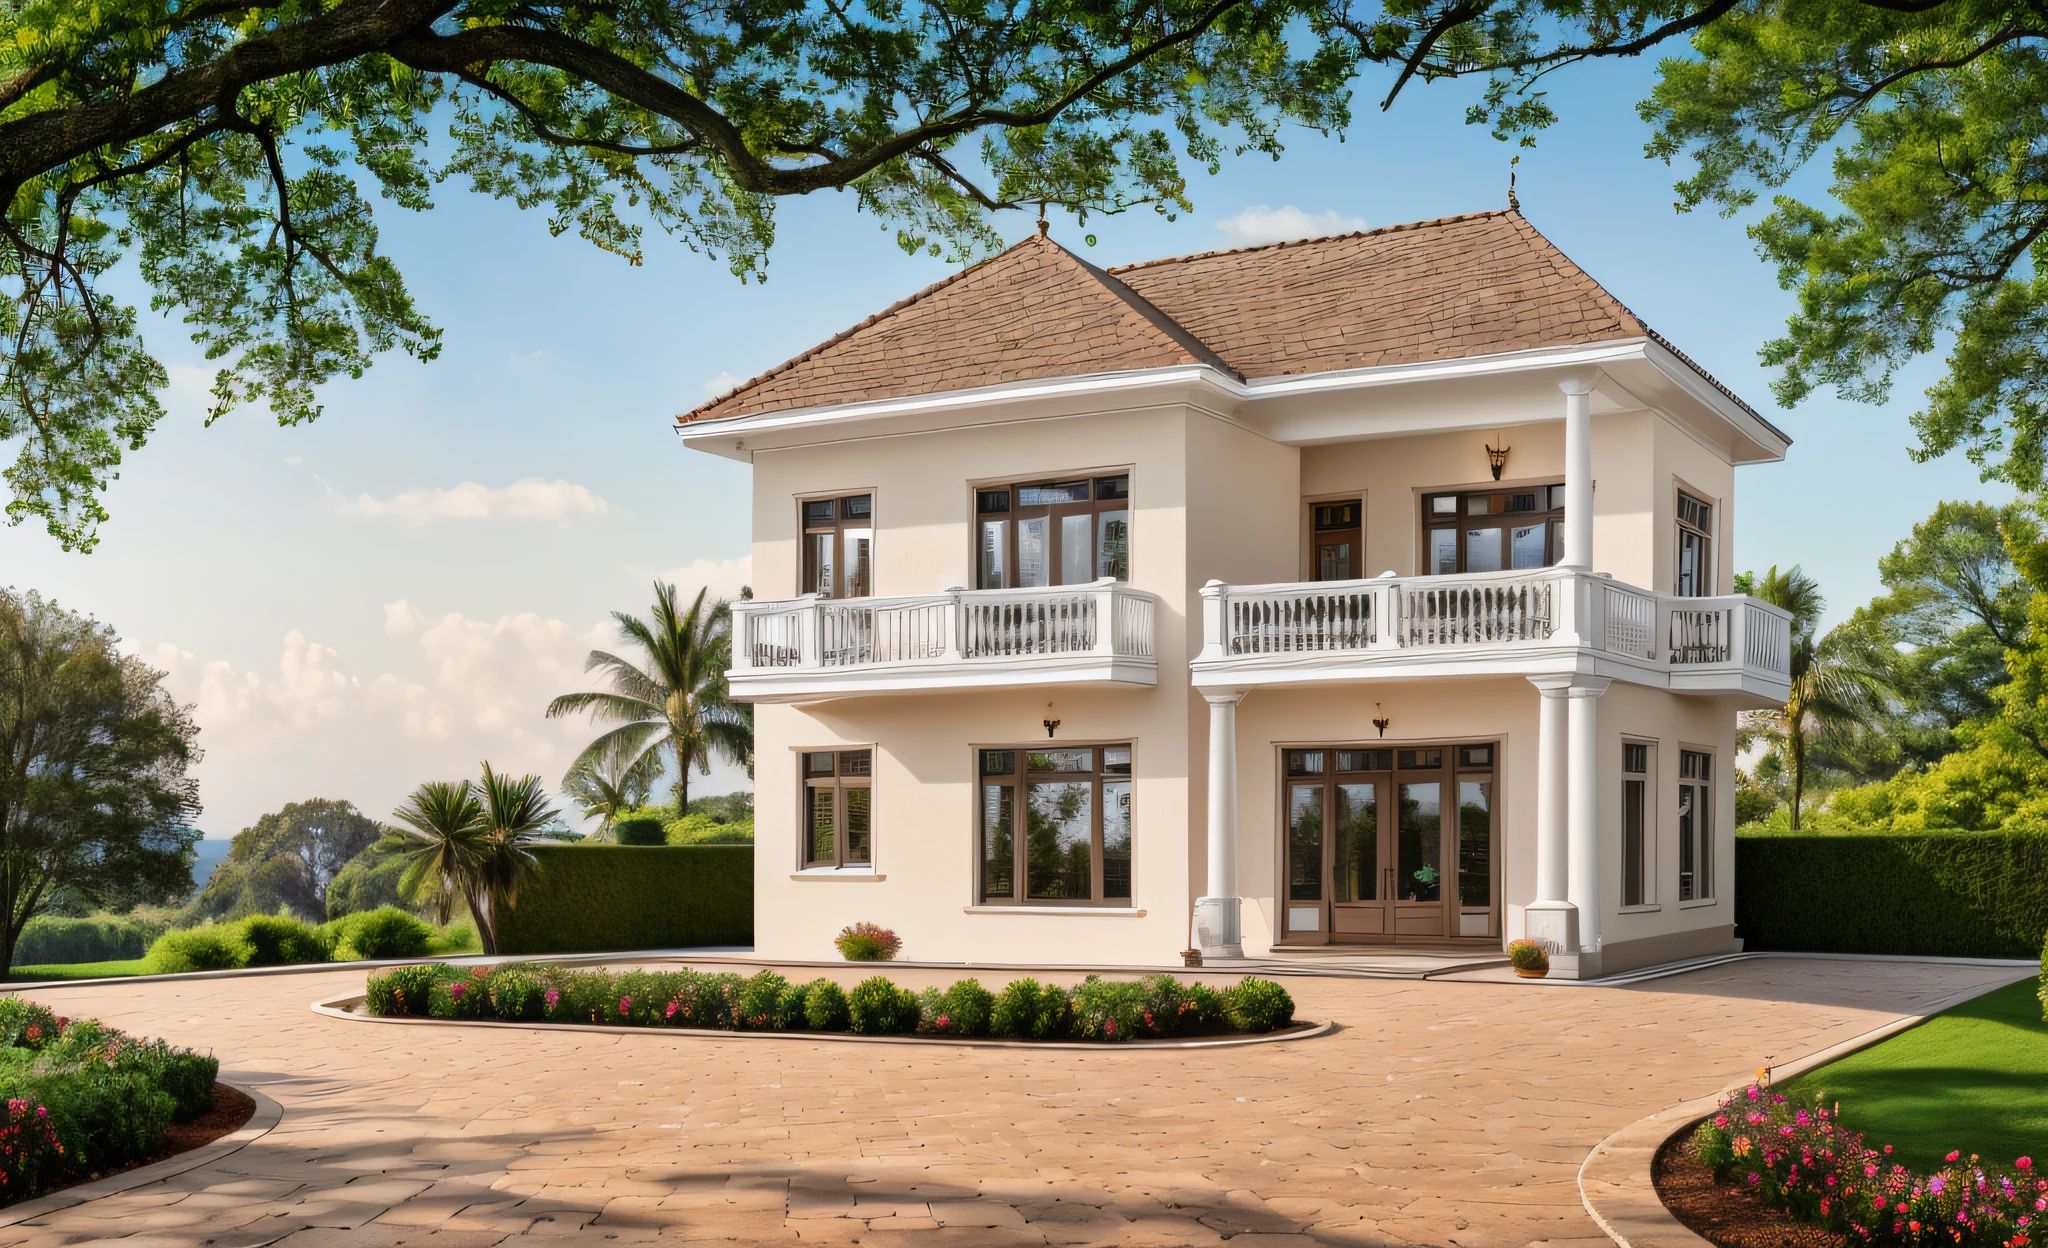 RAW photo,Masterpiece,high quality,best quality,authentic,super detail,exterior, villa, classical style, light beige wallpaint, grey roof tile, garden background, high detailed,8k uhd,dslr,soft lighting,high quality,photography shot with Leica CL with Leica Summilux-TL 35mm f-1.4 ASPH